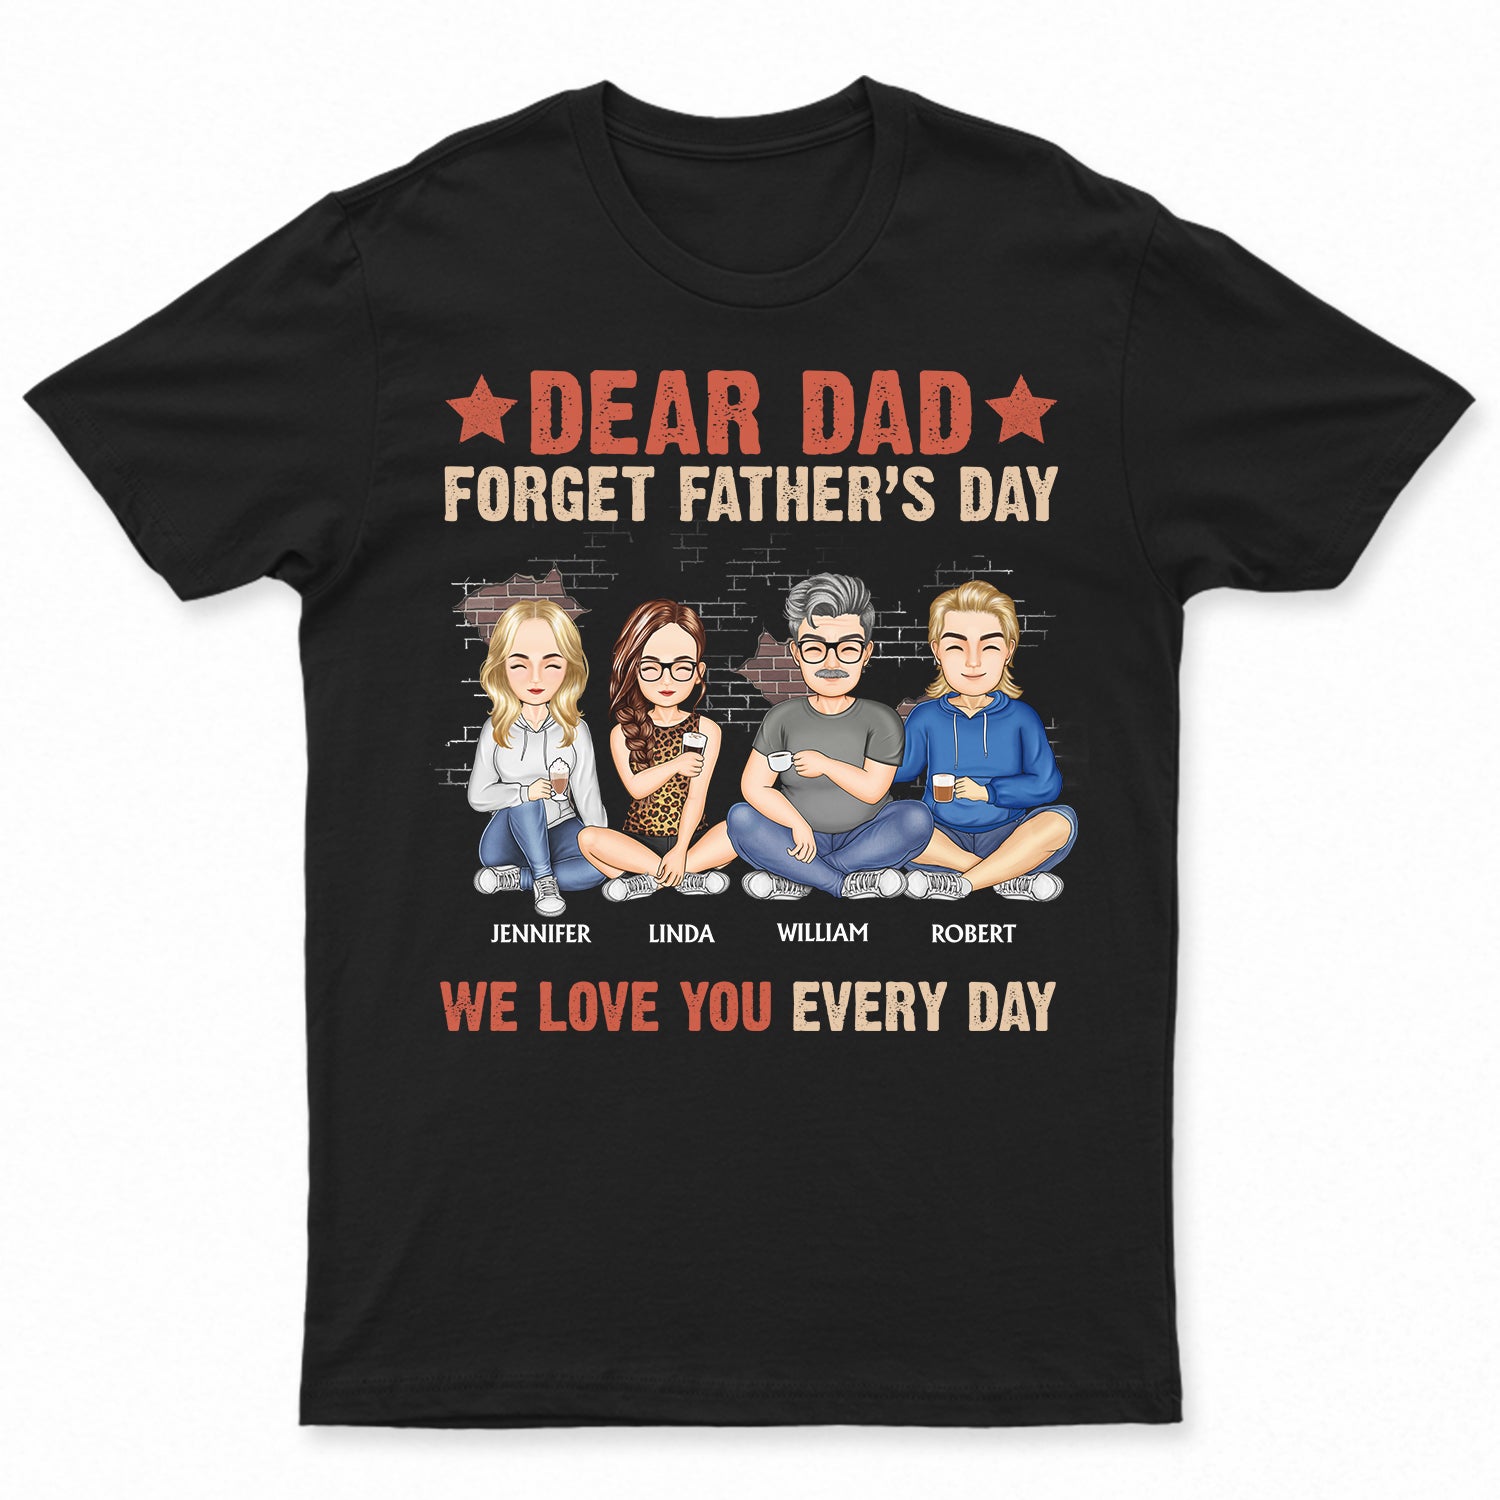 Dad We Love You Every Day - Birthday, Loving Gift For Dad, Father, Papa, Grandpa, Grandfather - Personalized Custom T Shirt